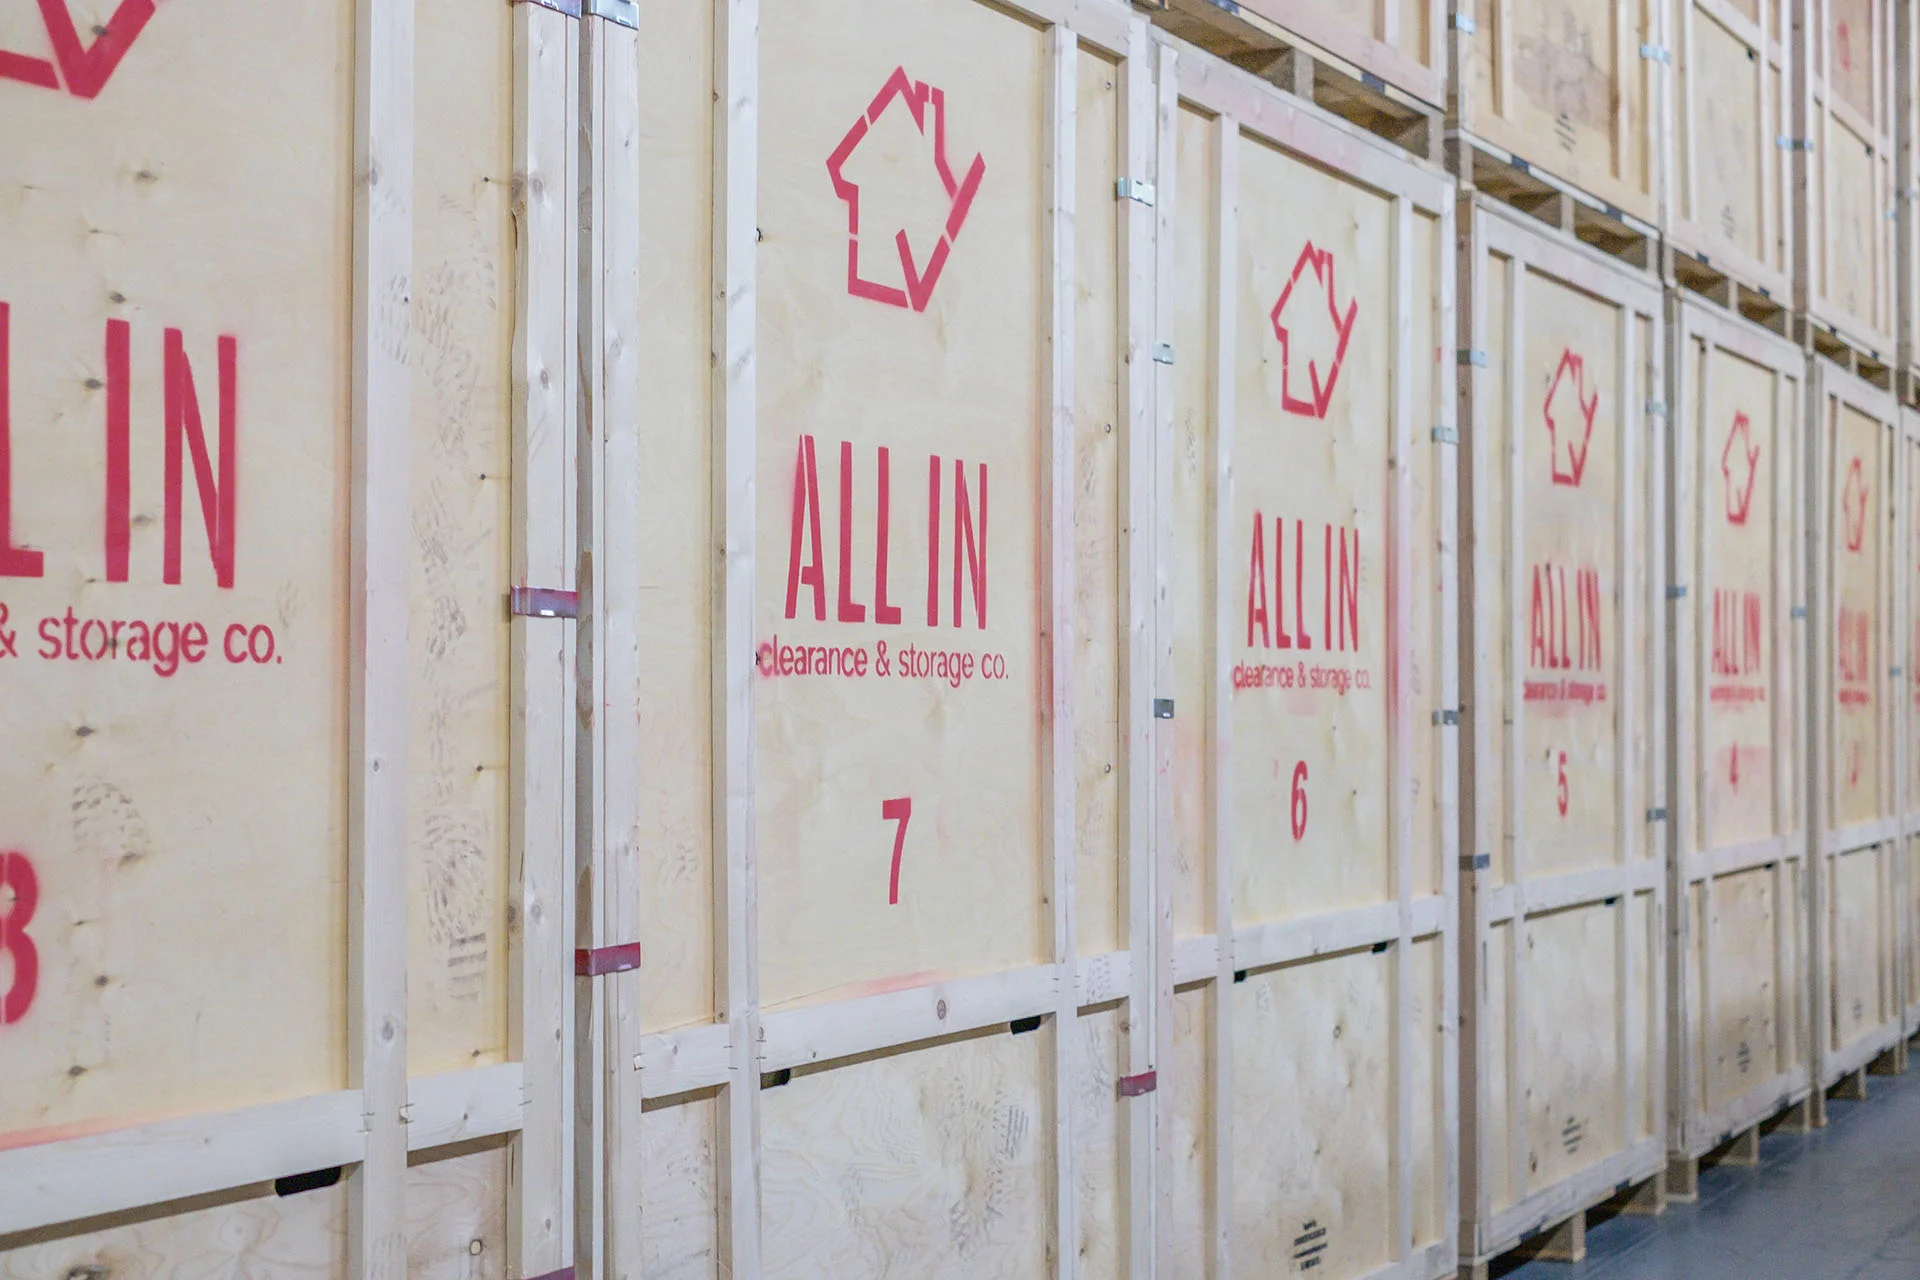 All In Clearance & Storage Co. Ltd